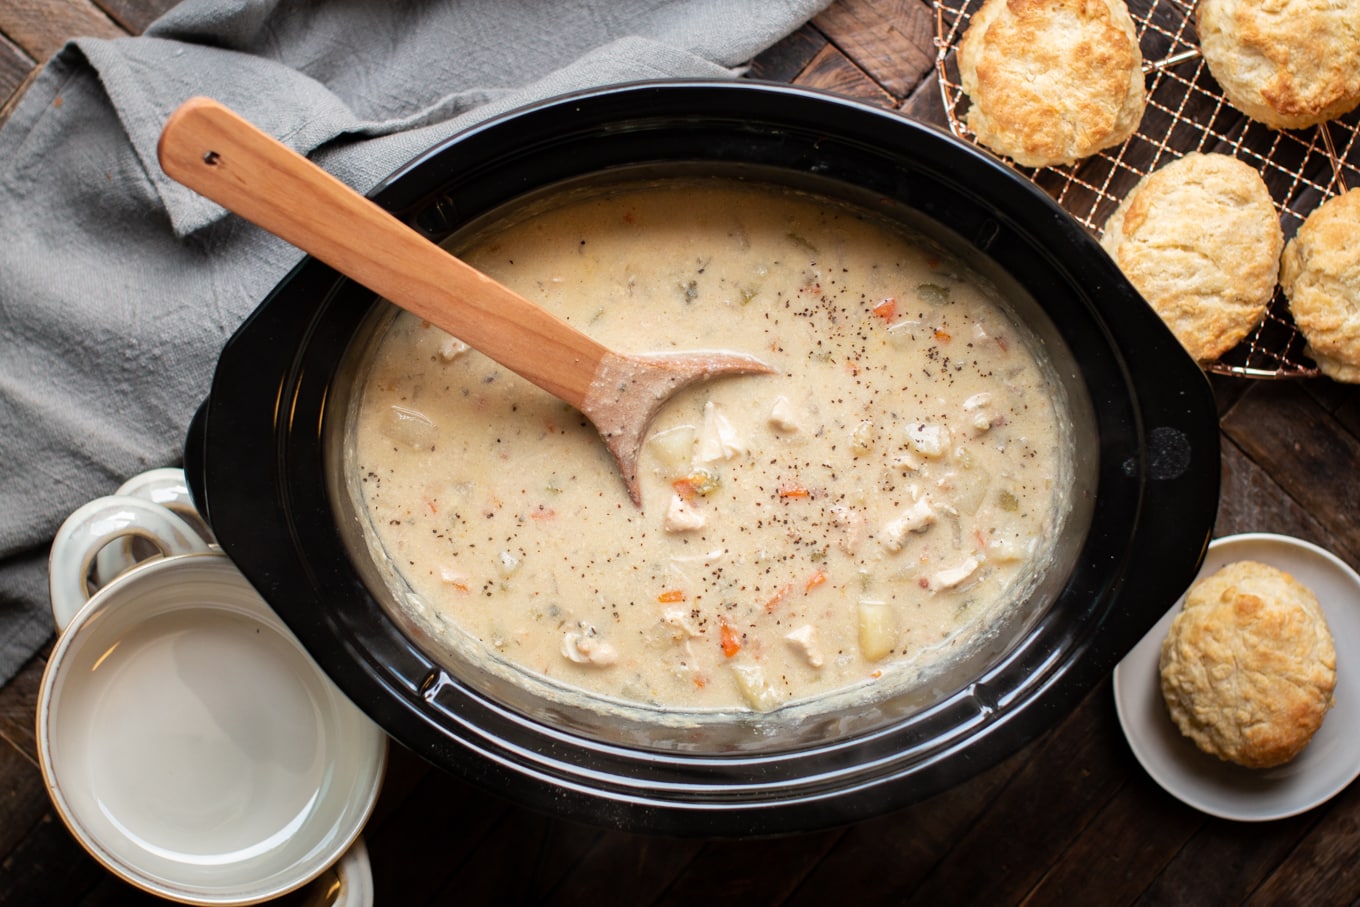 Chicken pot pie filling with wooden spoon in it